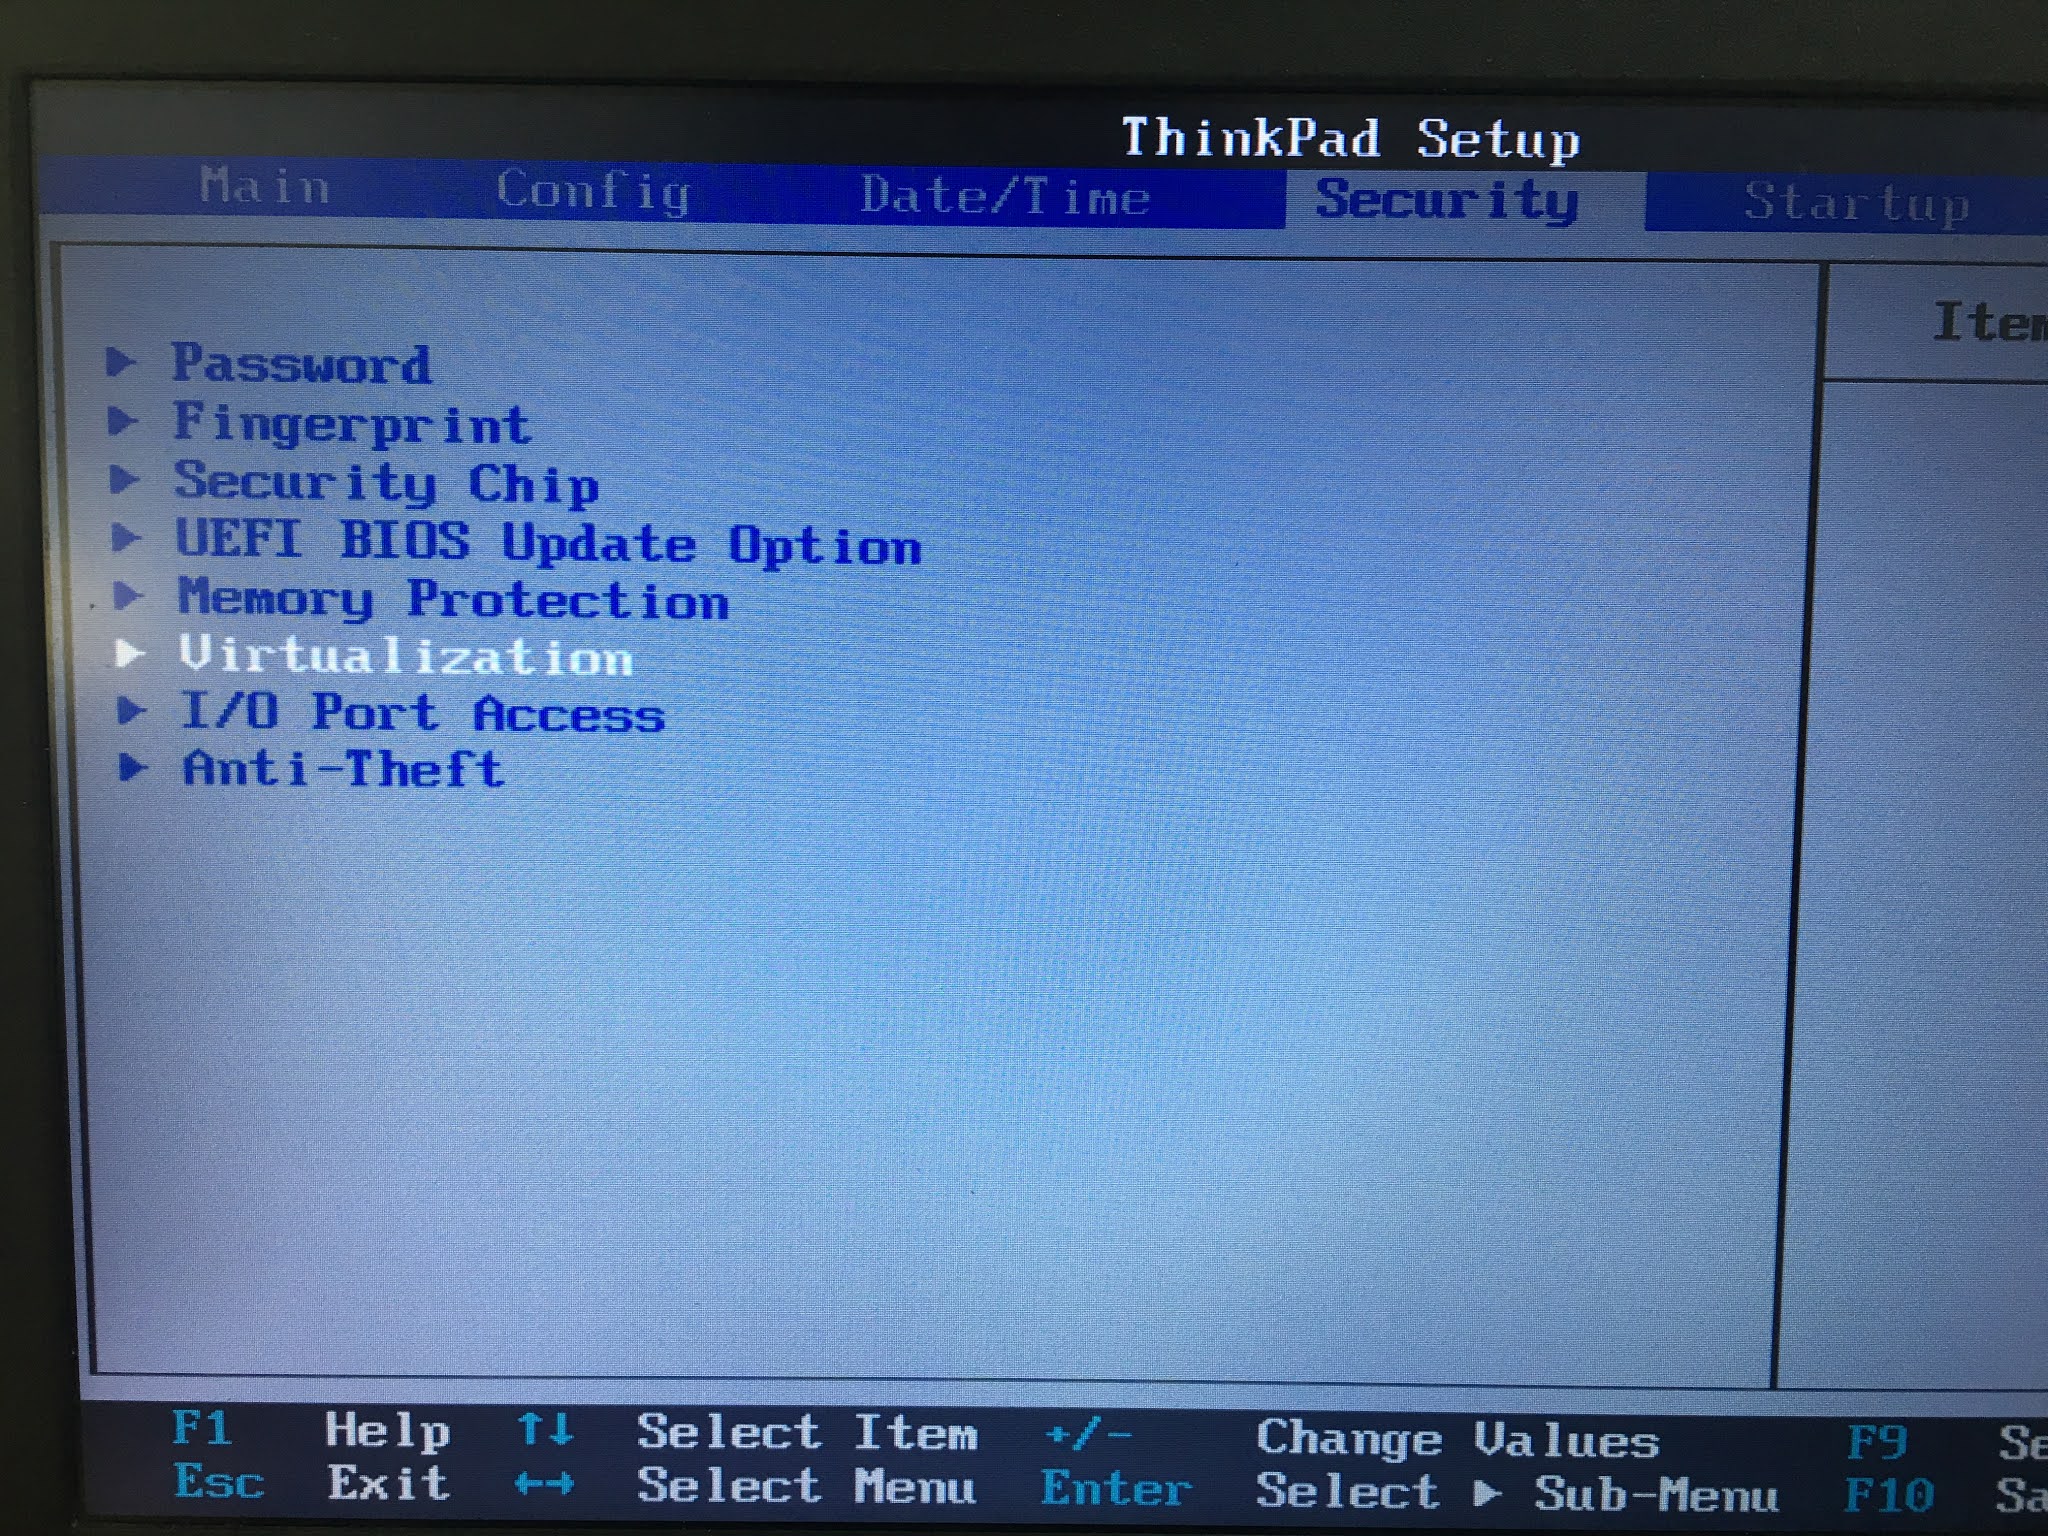 vt support in the chip and in the bios